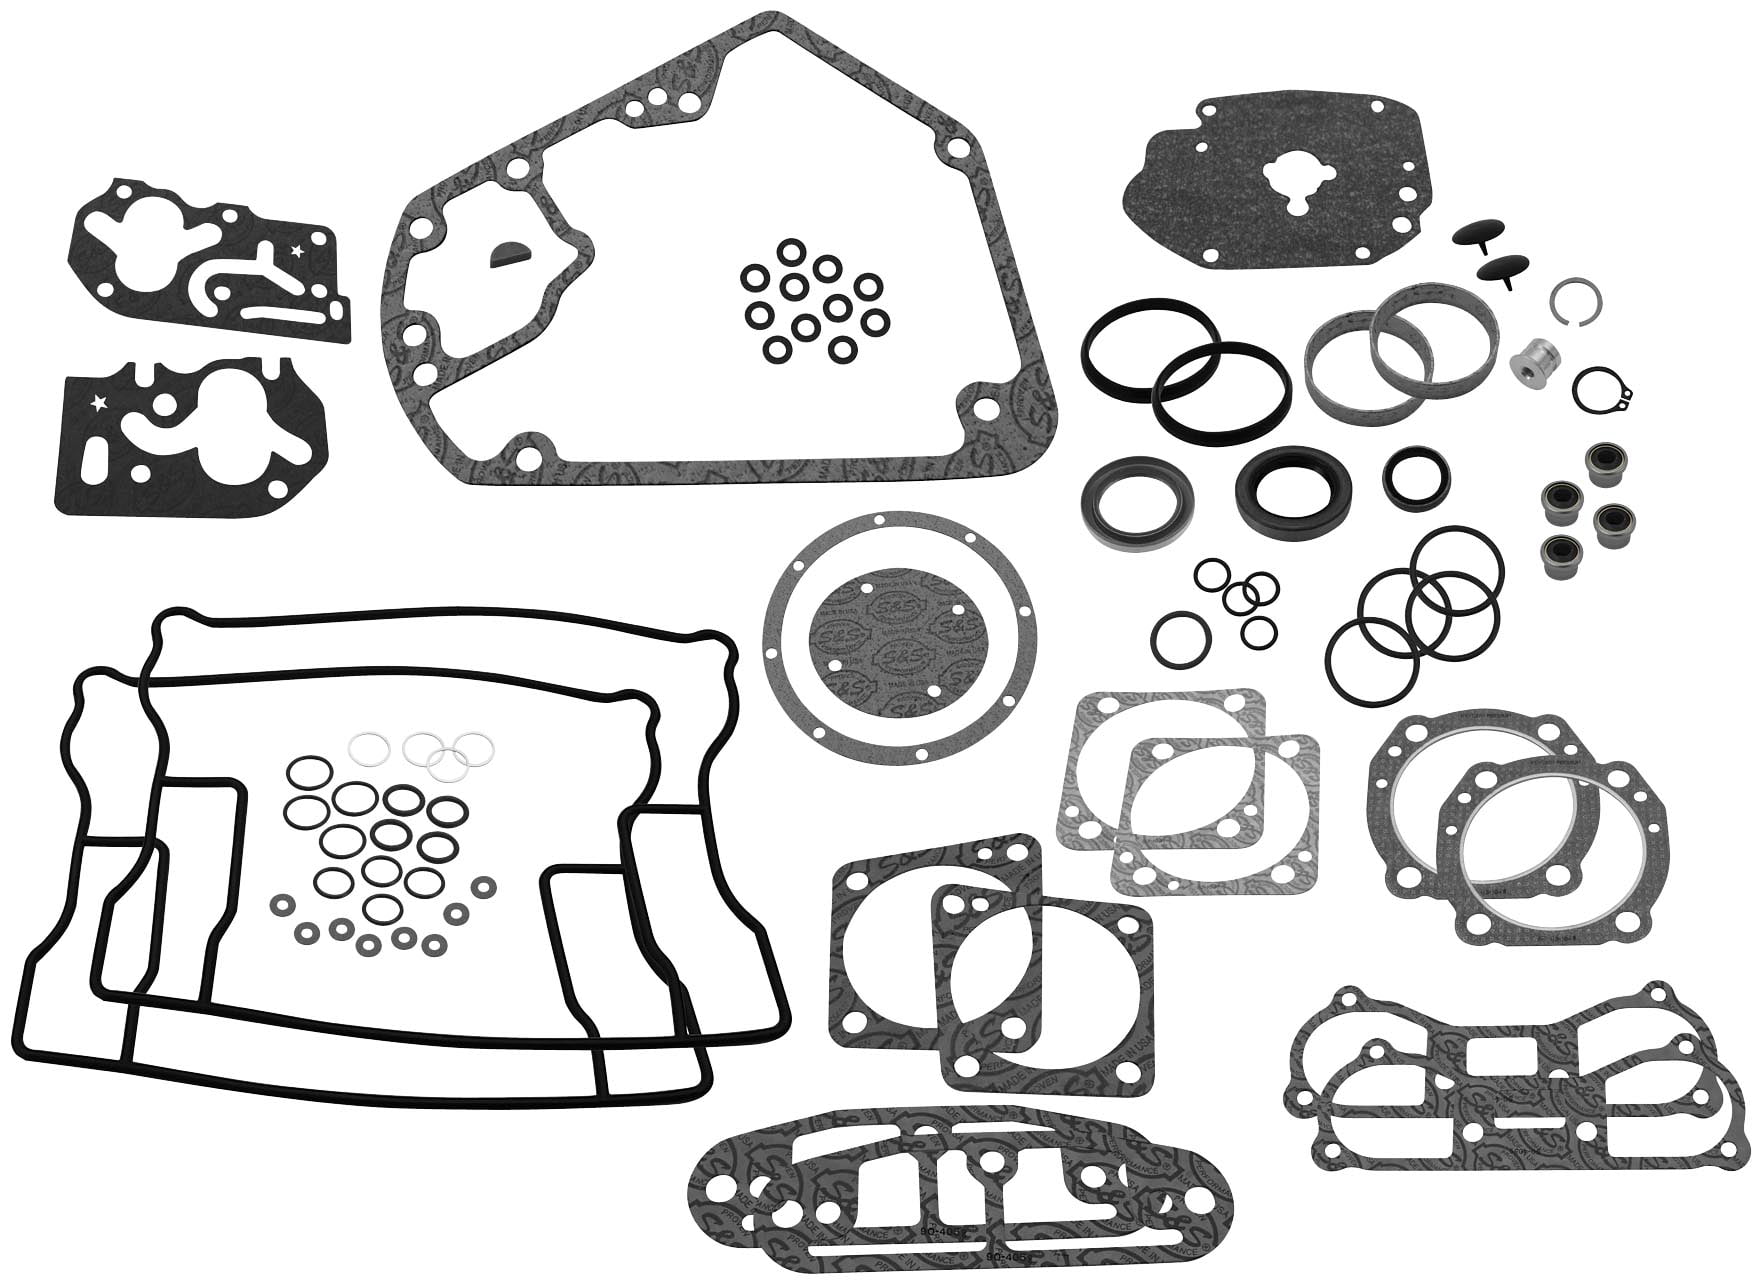 90-4111 S&S Cycle 4-1/8in Die Cast Rocker Covers Gasket Kit Bore for sale online 